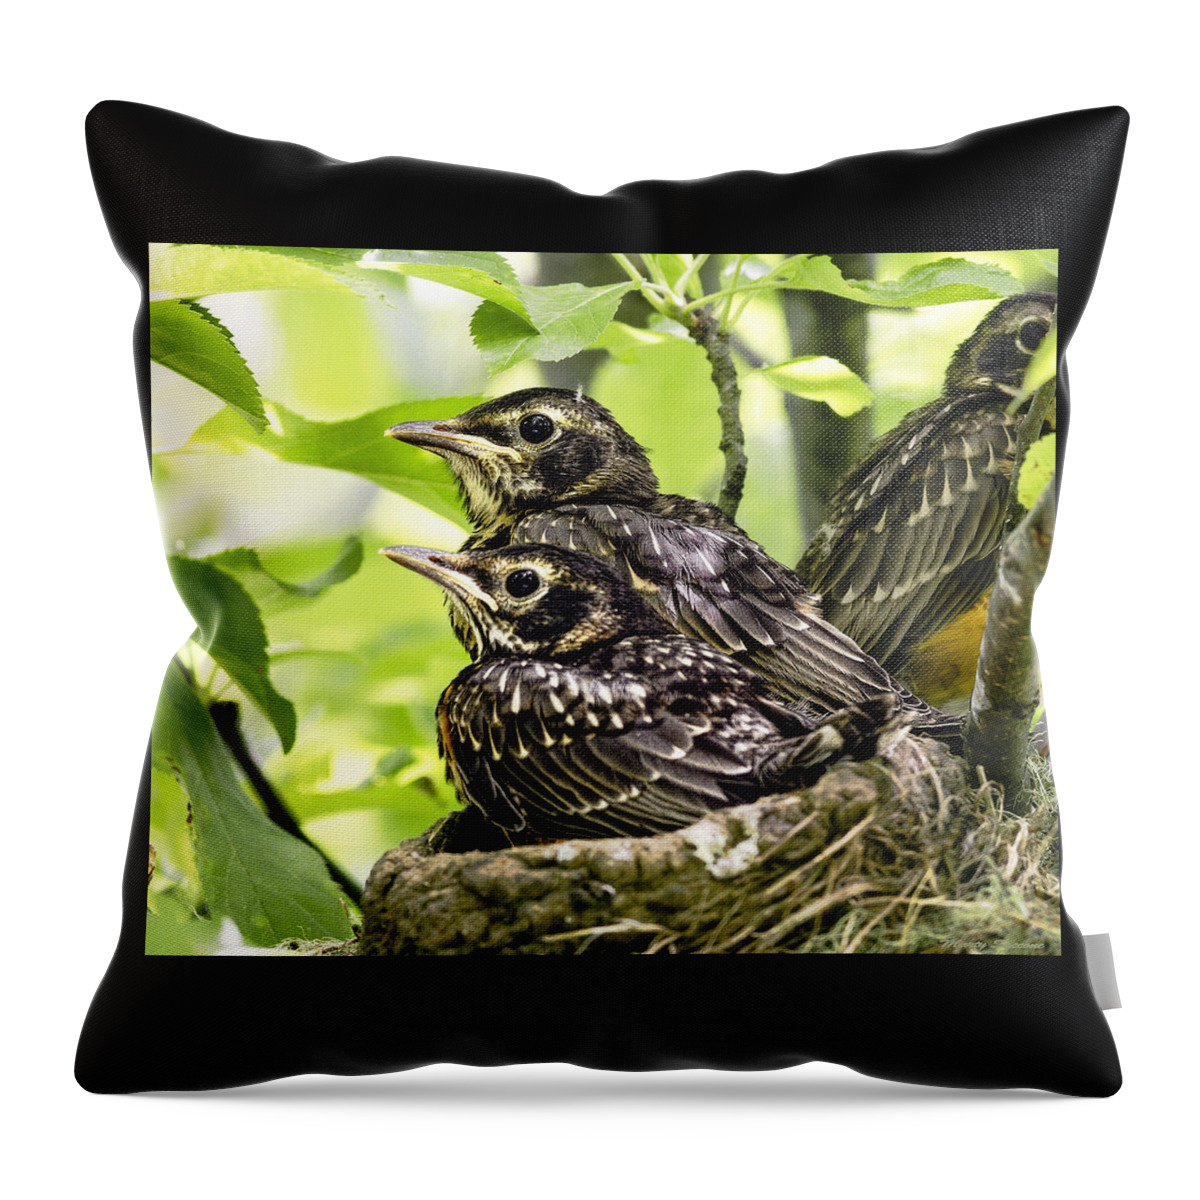 Juvenile Robins Prior To Fledging Throw Pillow featuring the photograph Juvenile Robins Just Prior to Fledging by Marty Saccone